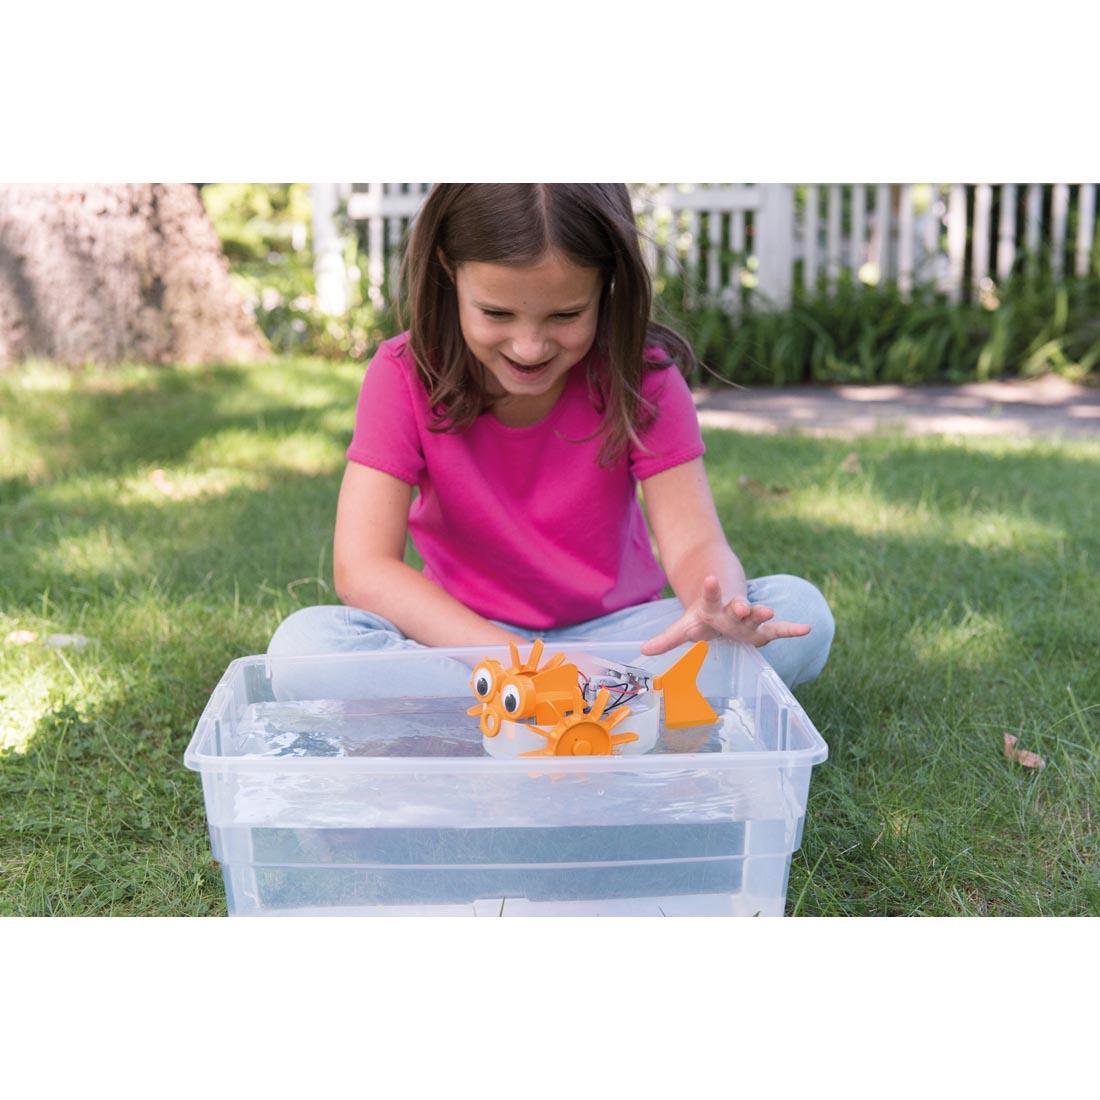 Child playing outside with the 4M Green Science Solar Hybrid Power Aqua Robot in a tub of water